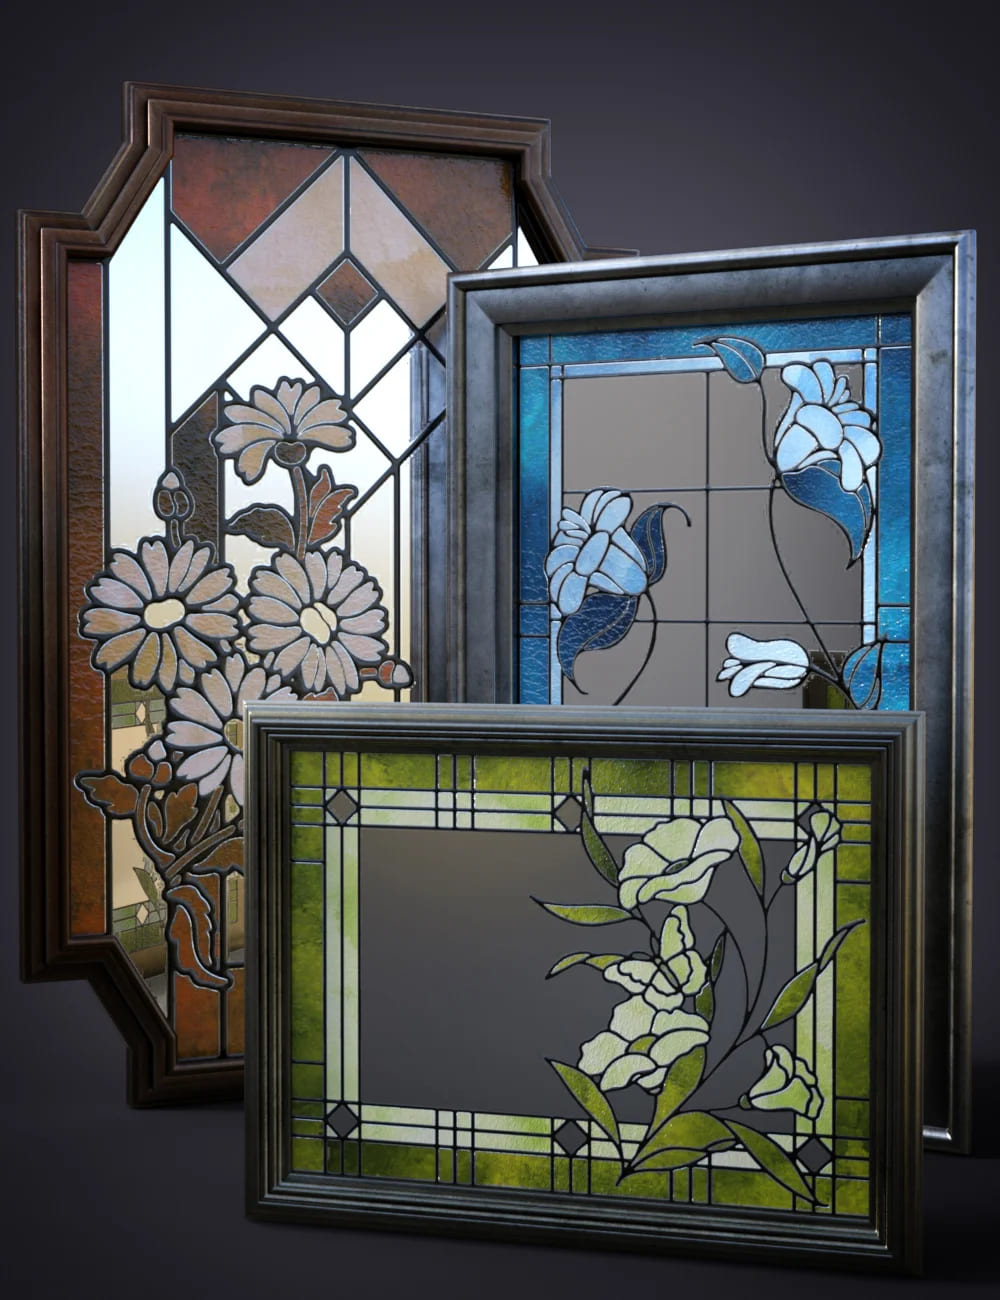 B.E.T.T.Y. Stained Glass Mirrors_DAZ3D下载站